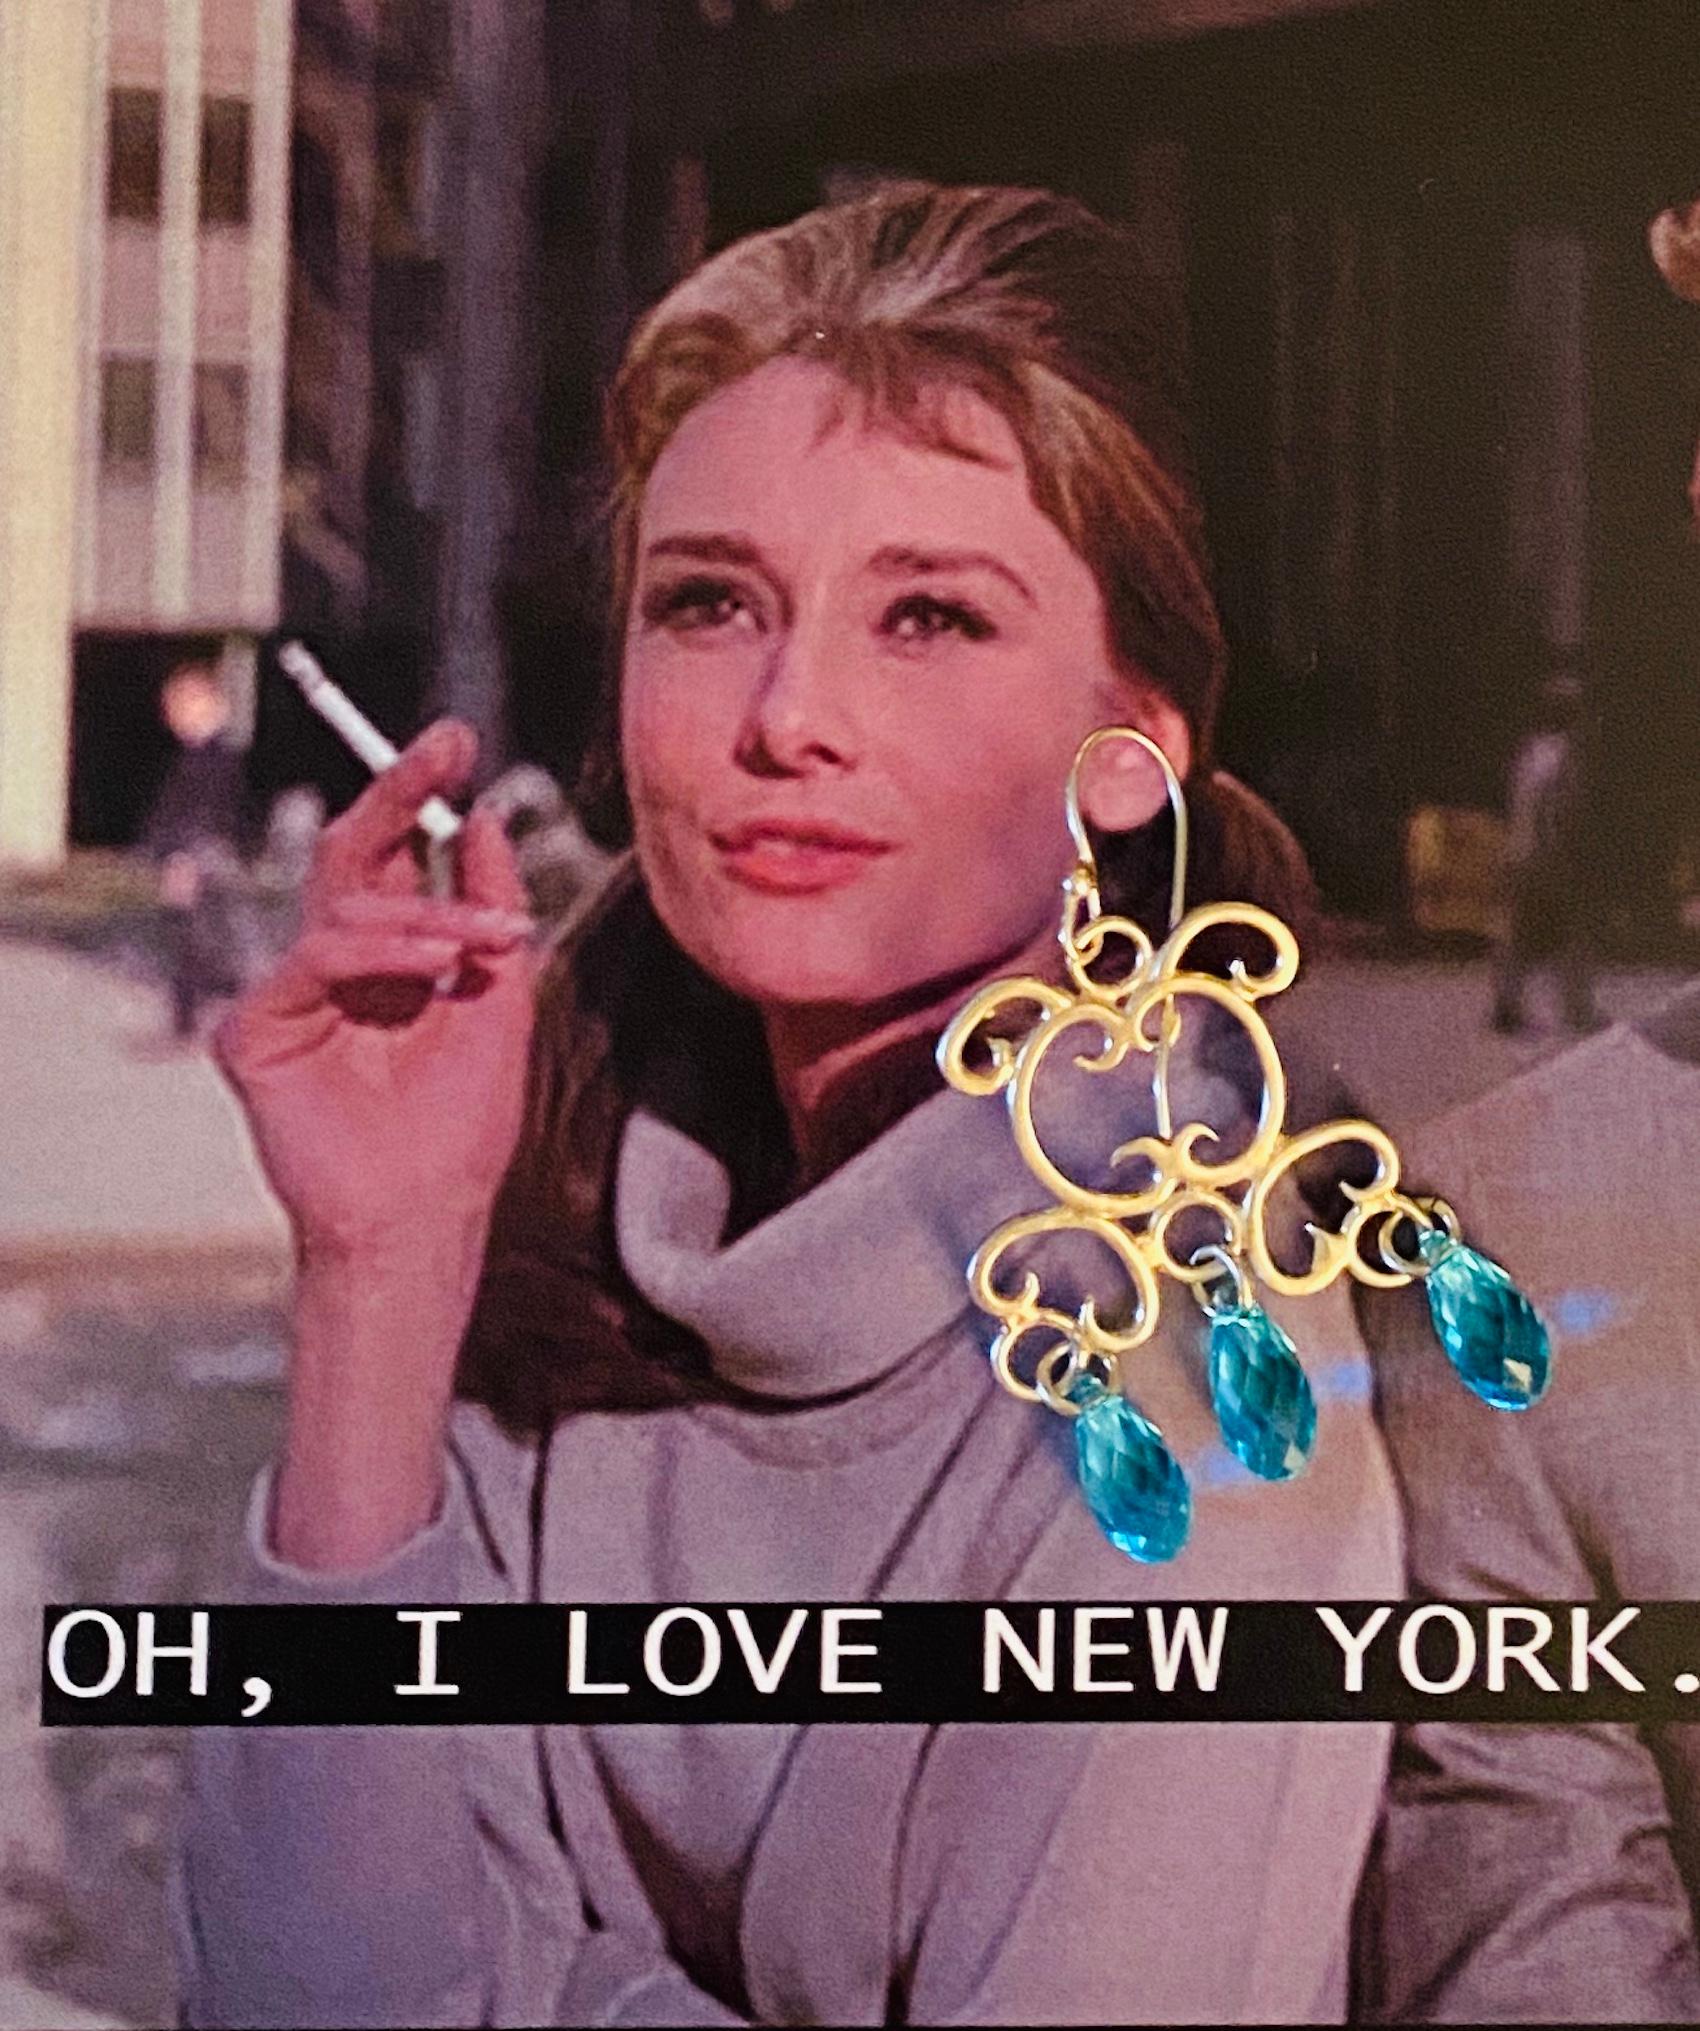 Stunning Gold Vermeil Chandelier Earrings with Teal Swarovski Crystals from April in Paris designs. If you love New York you will most definitely love these earrings designed by 
Merideth McGregor. Available in Sterling Silver, 18K Gold, and an